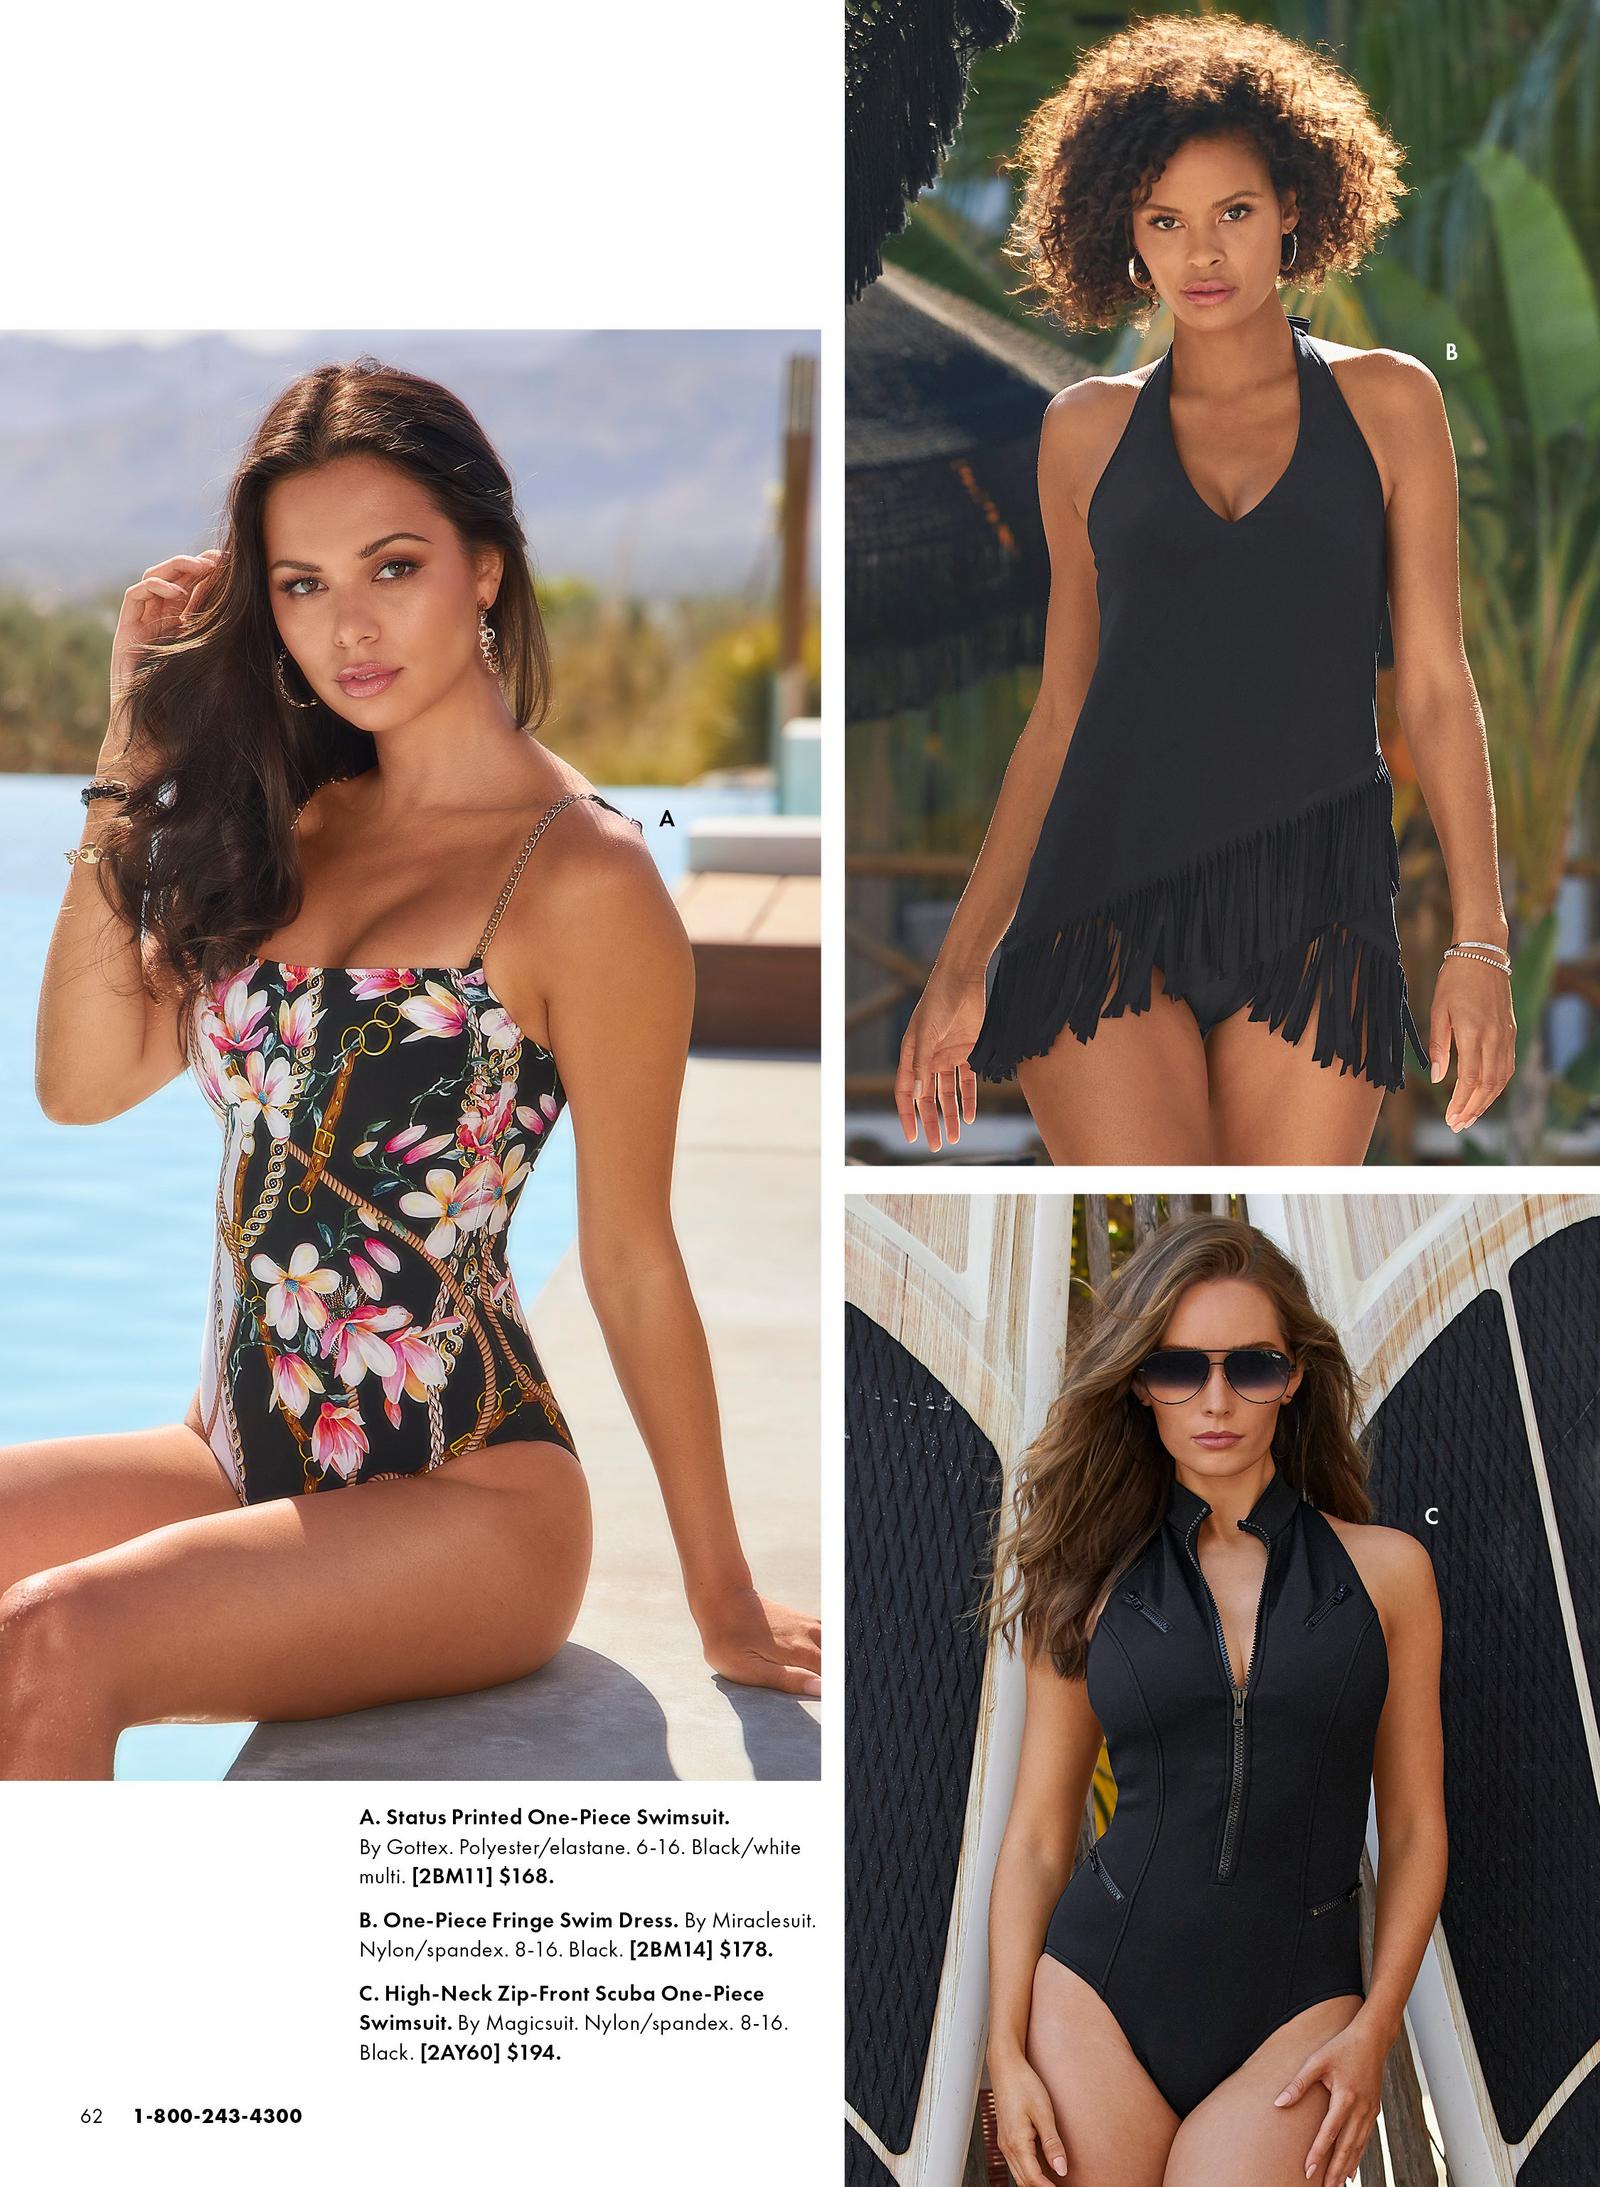 Model is wearing the Status Printed One-Piece Swimsuit in black with a colorful floral, chain and zipper print. ANother model wears the One-Piece Fringe Swim Dress in black with overlaying fabric and fringe bottom trim. The final model wears the High-Neck Zip-Front Scuba One Piece in black with black zipper details.